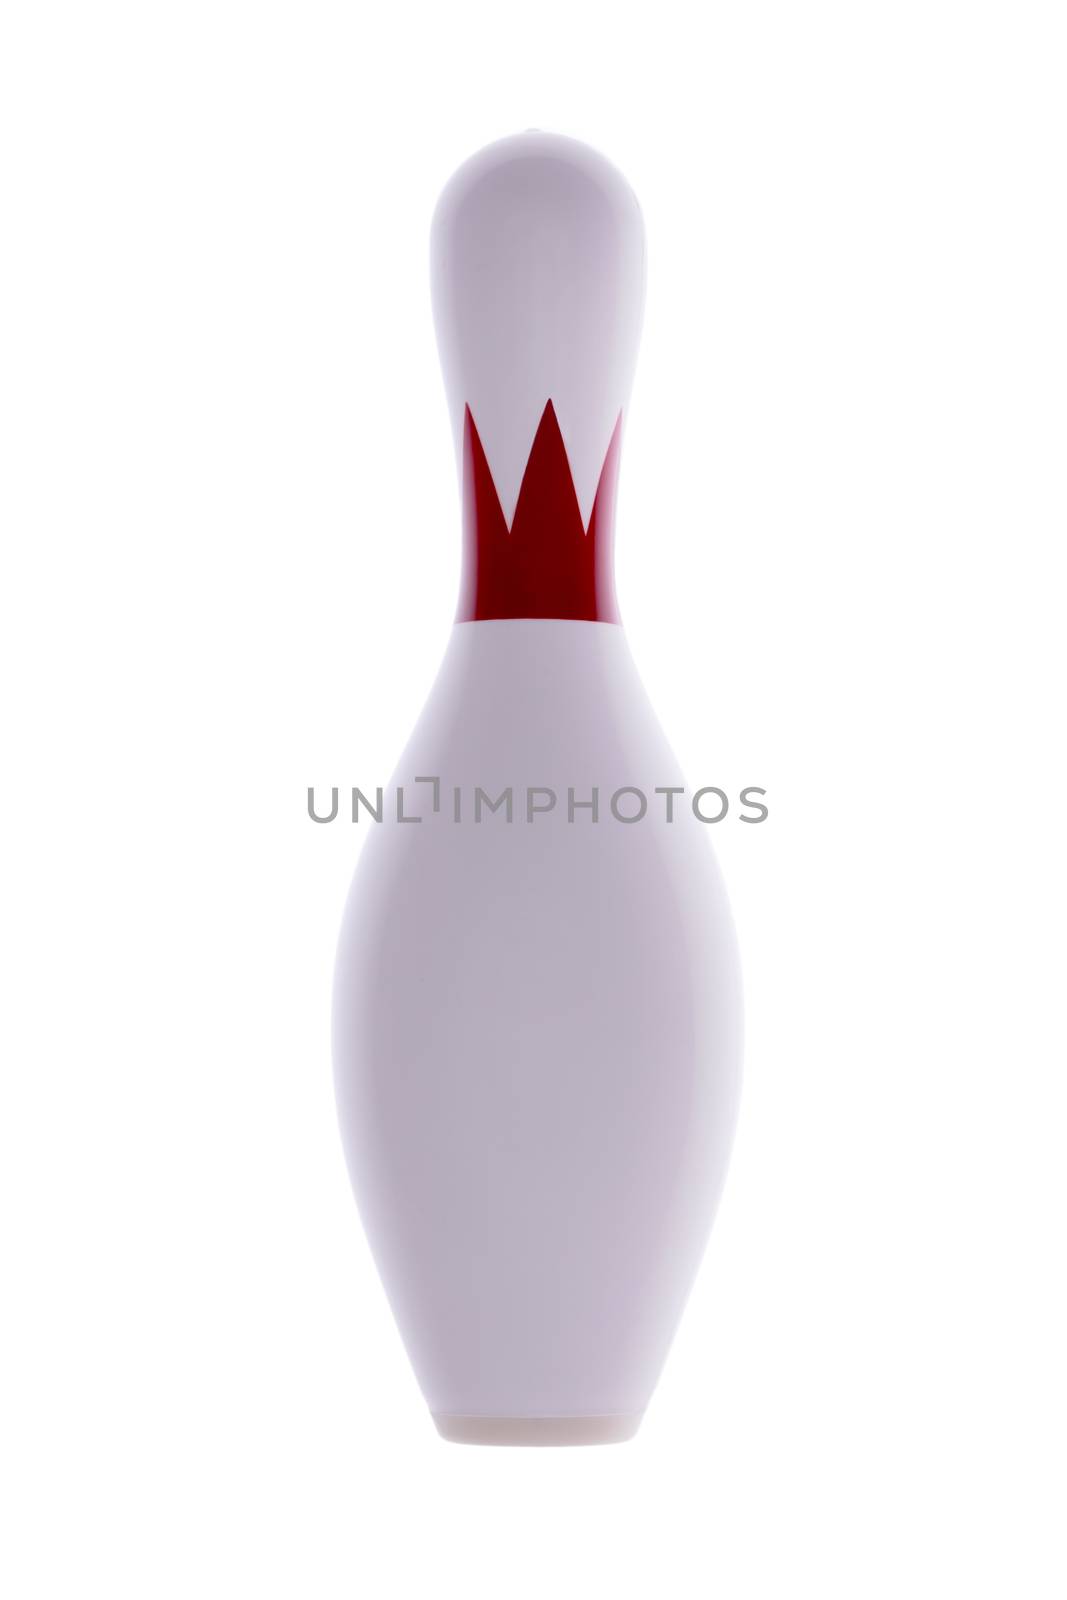 Single isolated bowling pin for playing tenpin bowling in an indoor alley with a colorful red collar on a white background